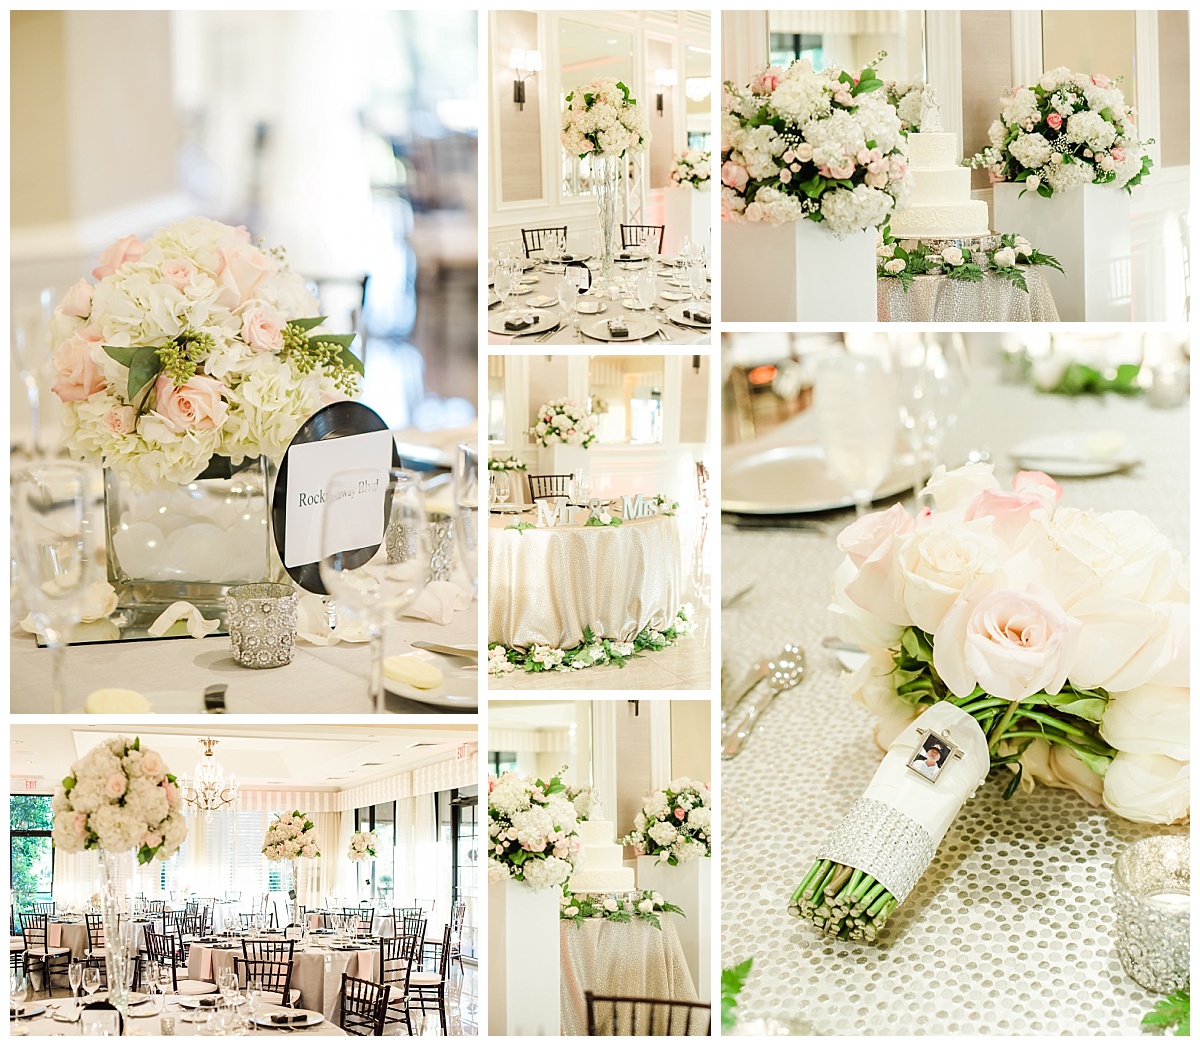 Reception Details at Breakers West Country Club